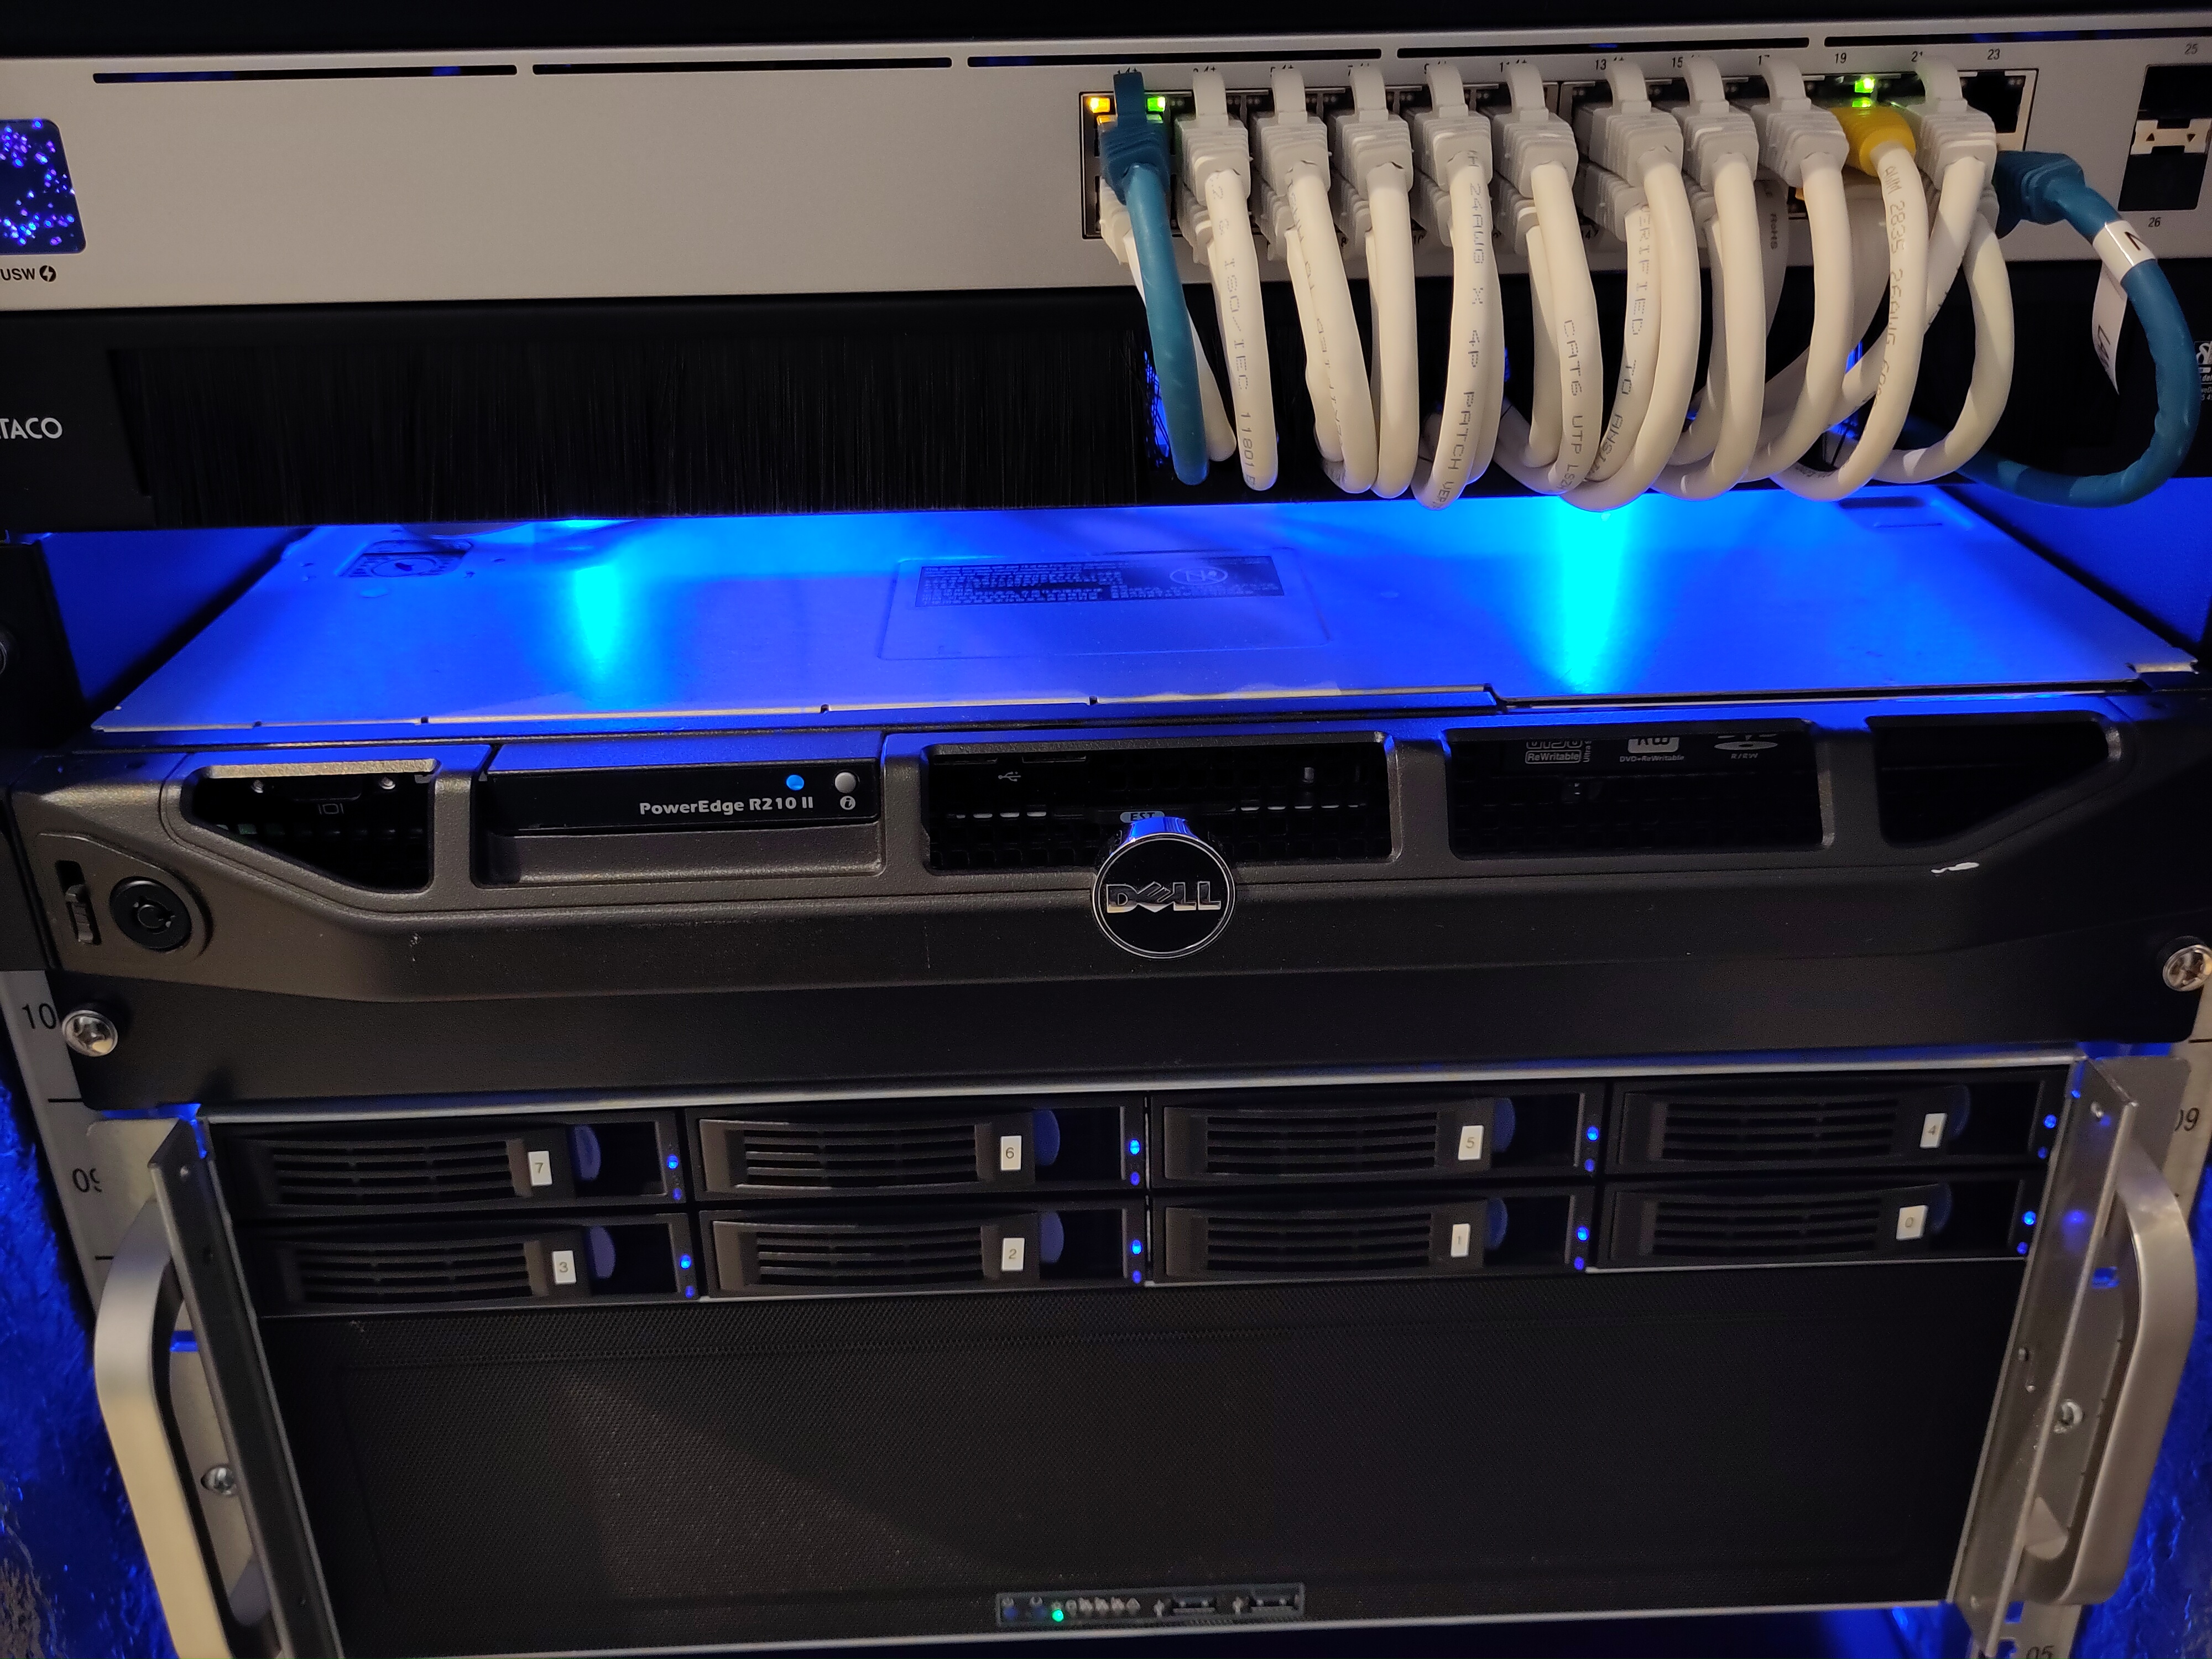 Dell PowerEdge R210 II - Router